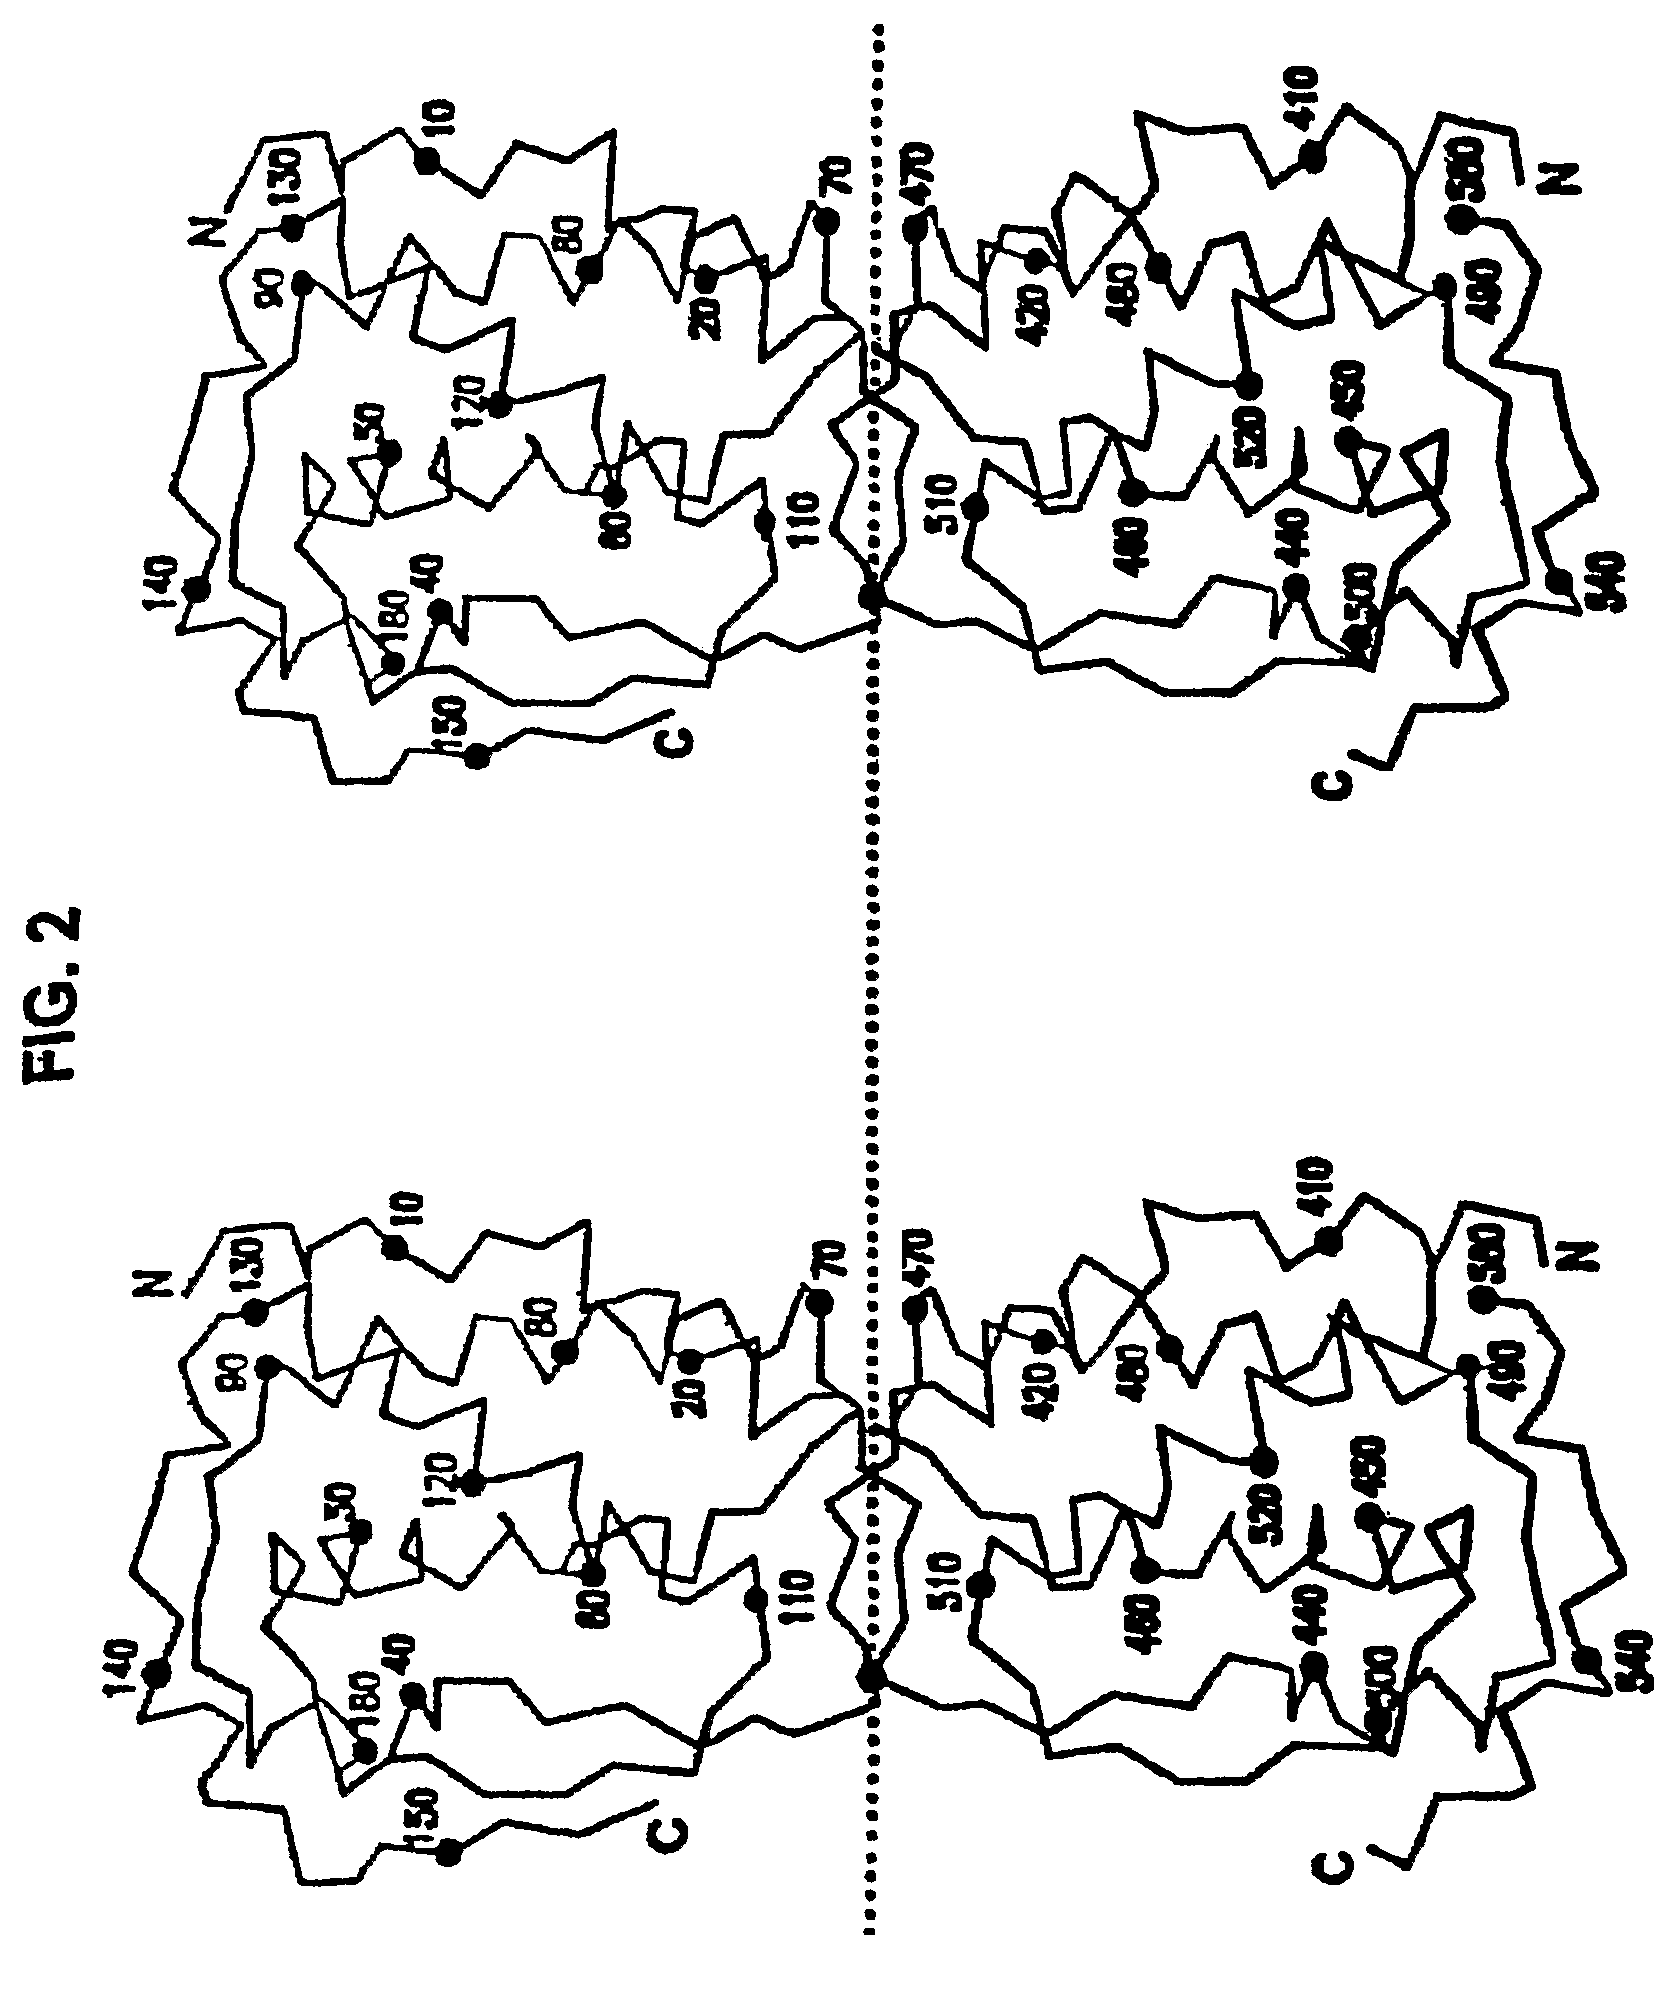 M-CSF-specific monoclonal antibody and uses thereof